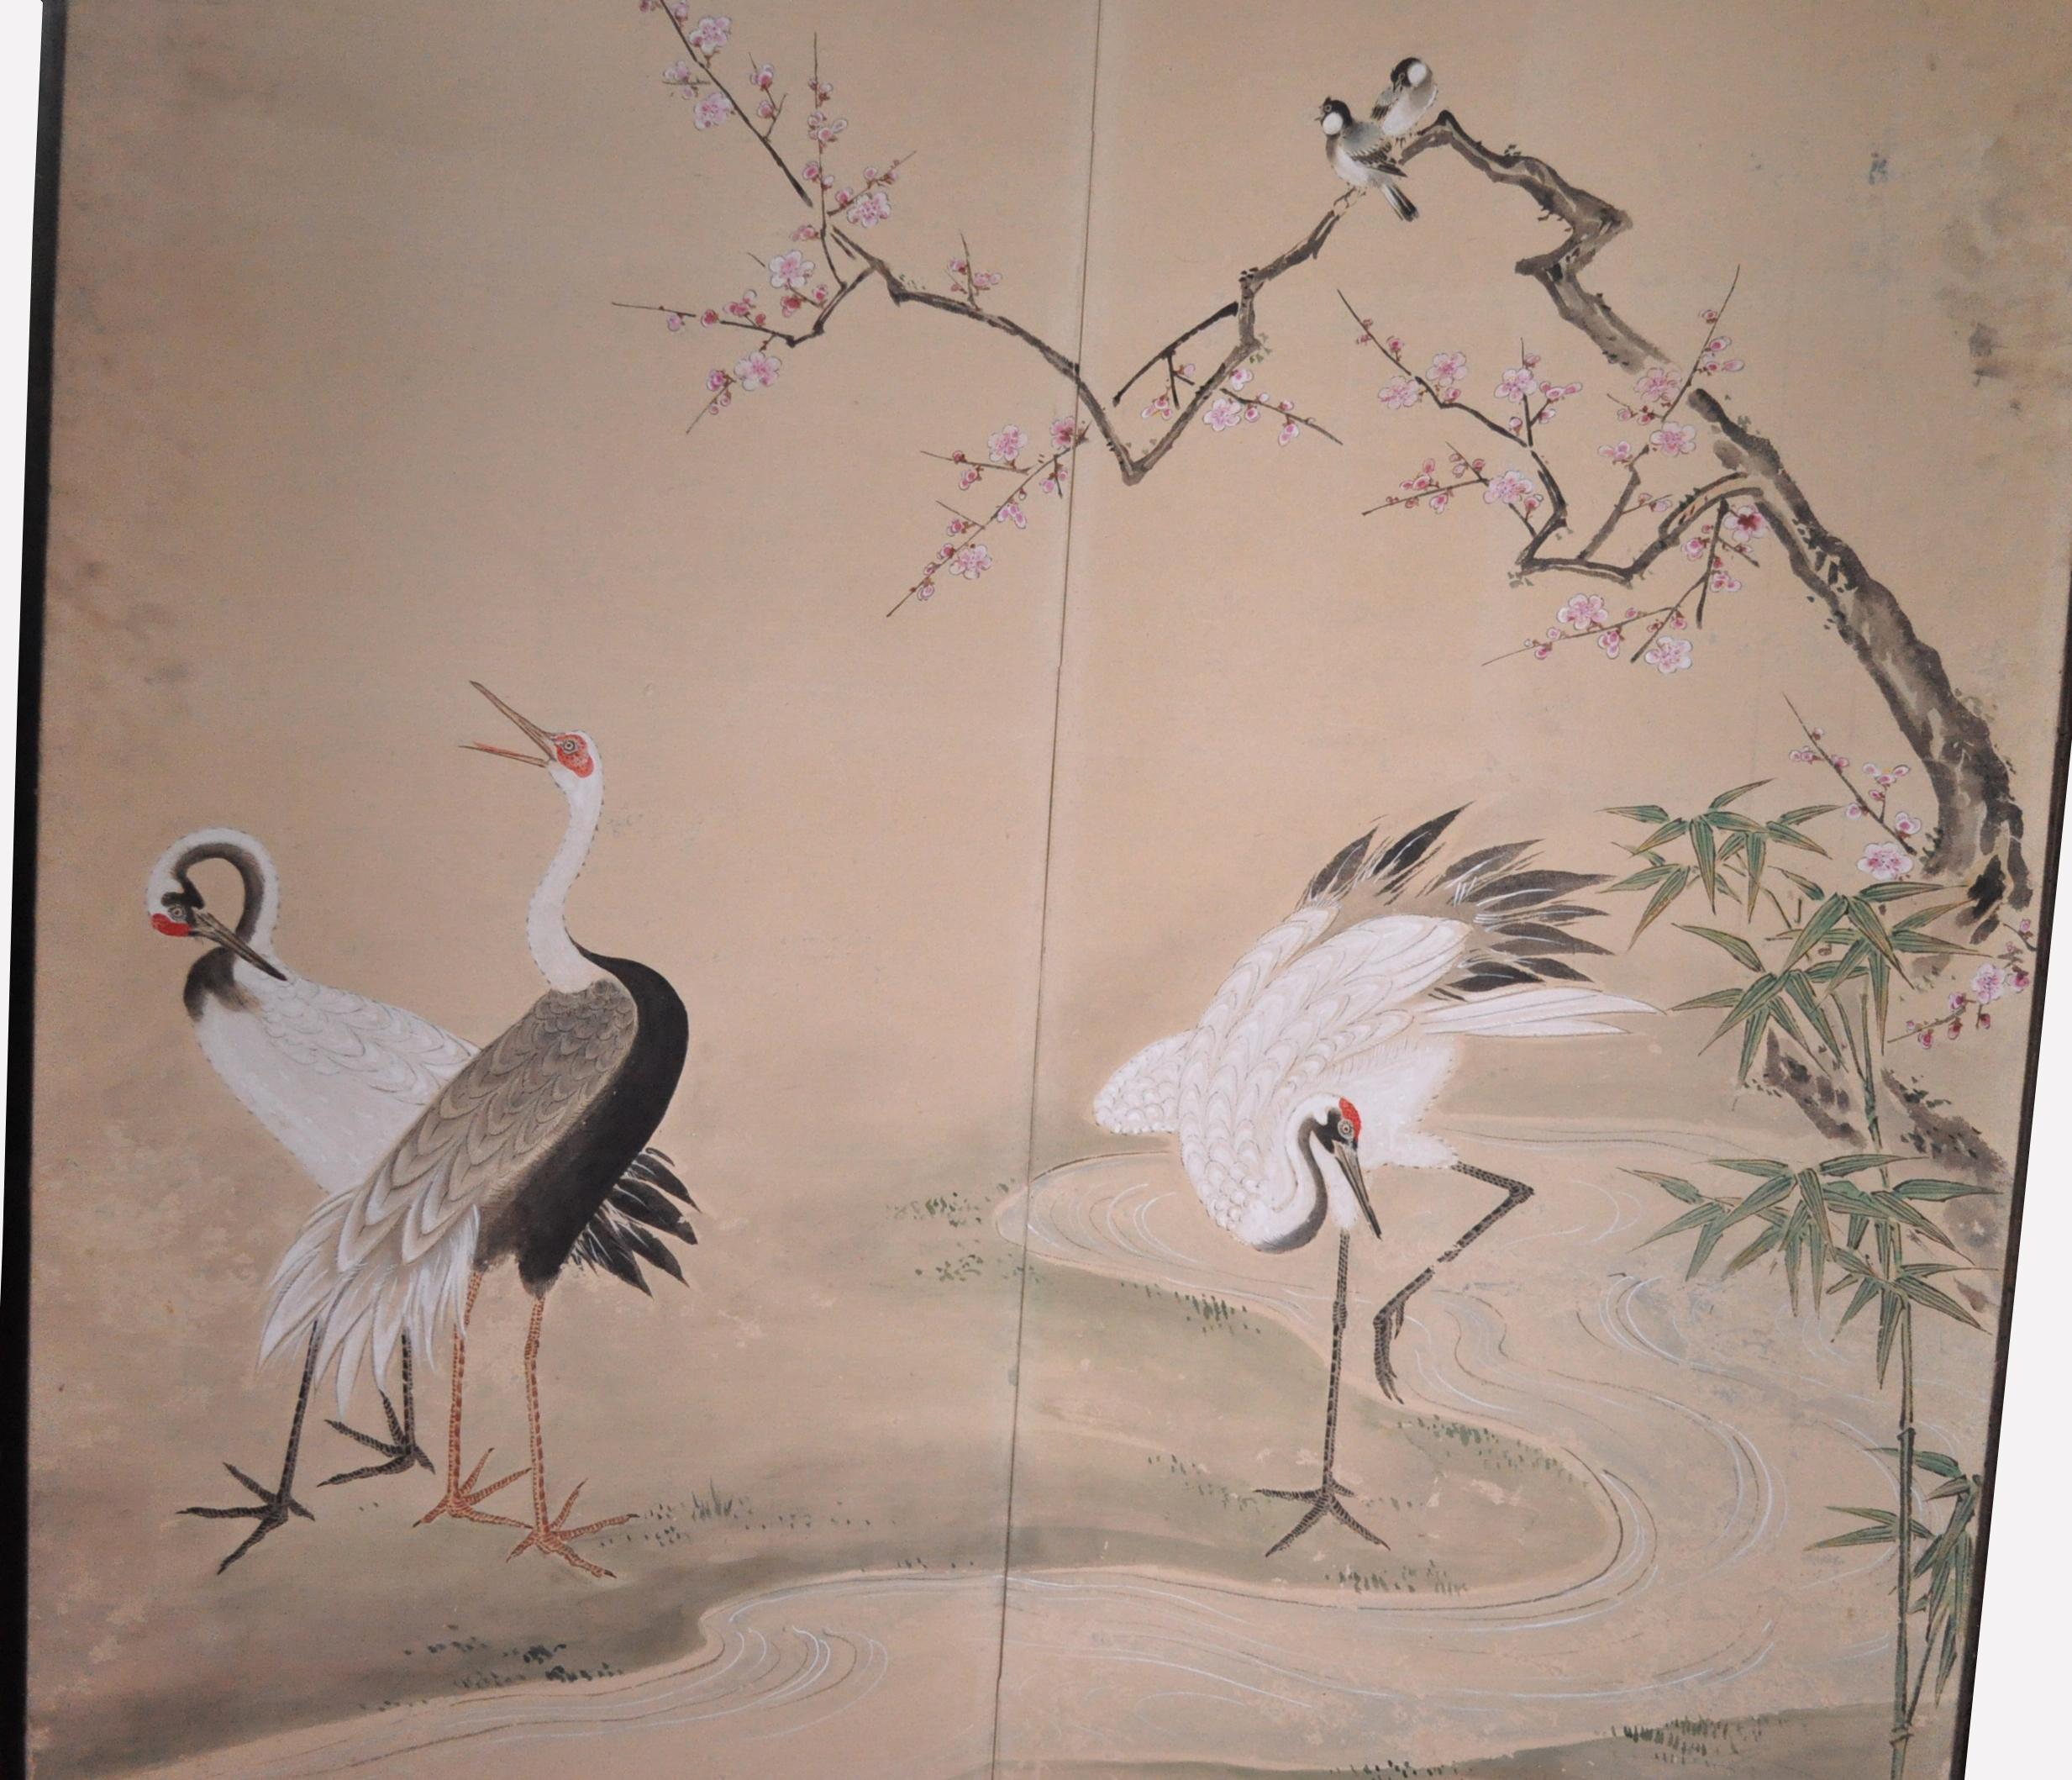 
An elegant antique Japanese 6-panel (byobu) screen painted with a composition of five standing cranes by a rushing stream surrounded by plum blossoms and bamboo with mountains in the distance. These elements are classic in their auspicious intent,